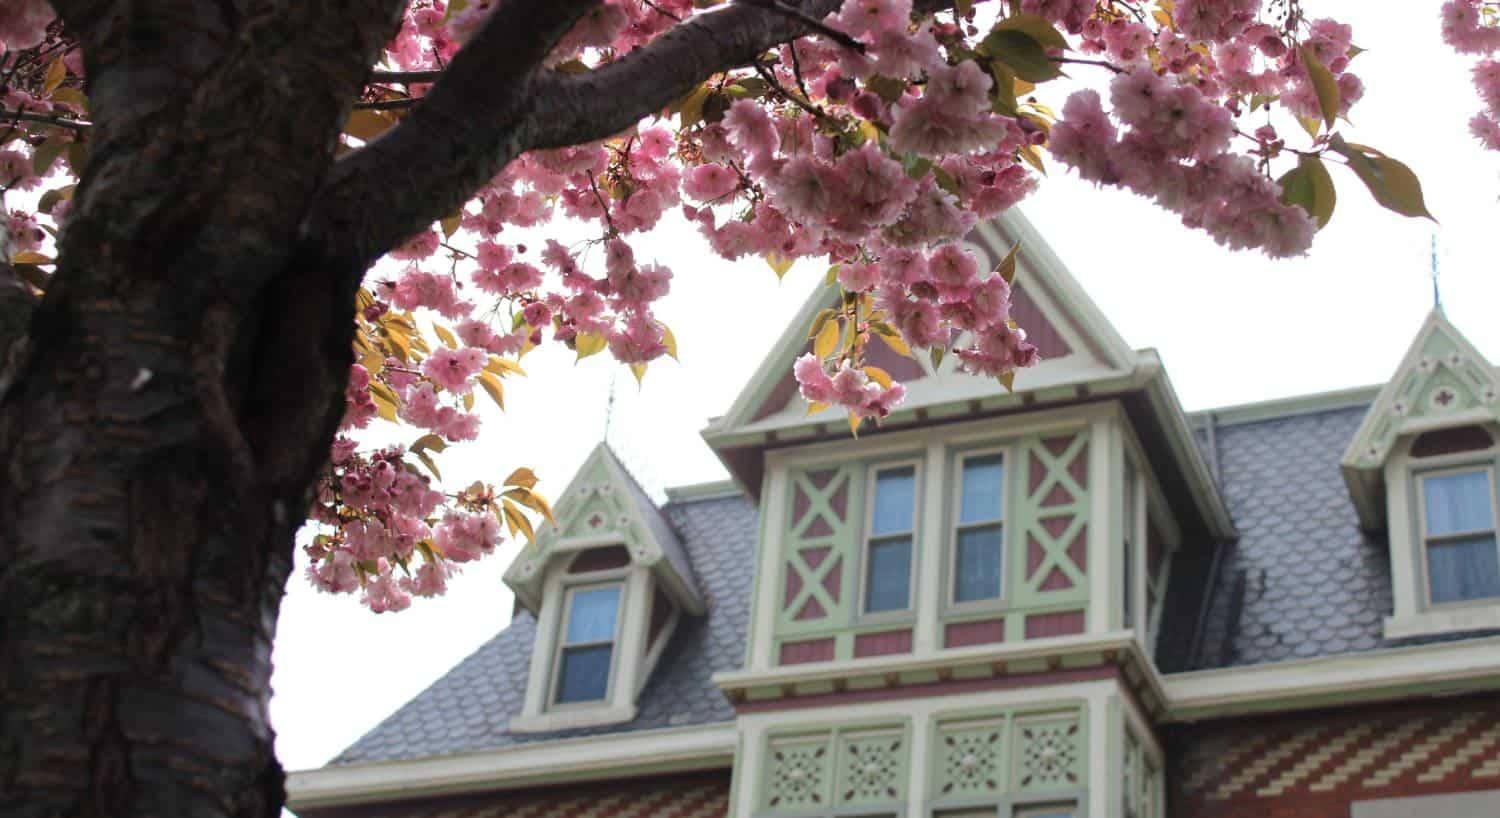 Close up view of a tree with pink blossoms and the top portion of the exterior of the house in the background